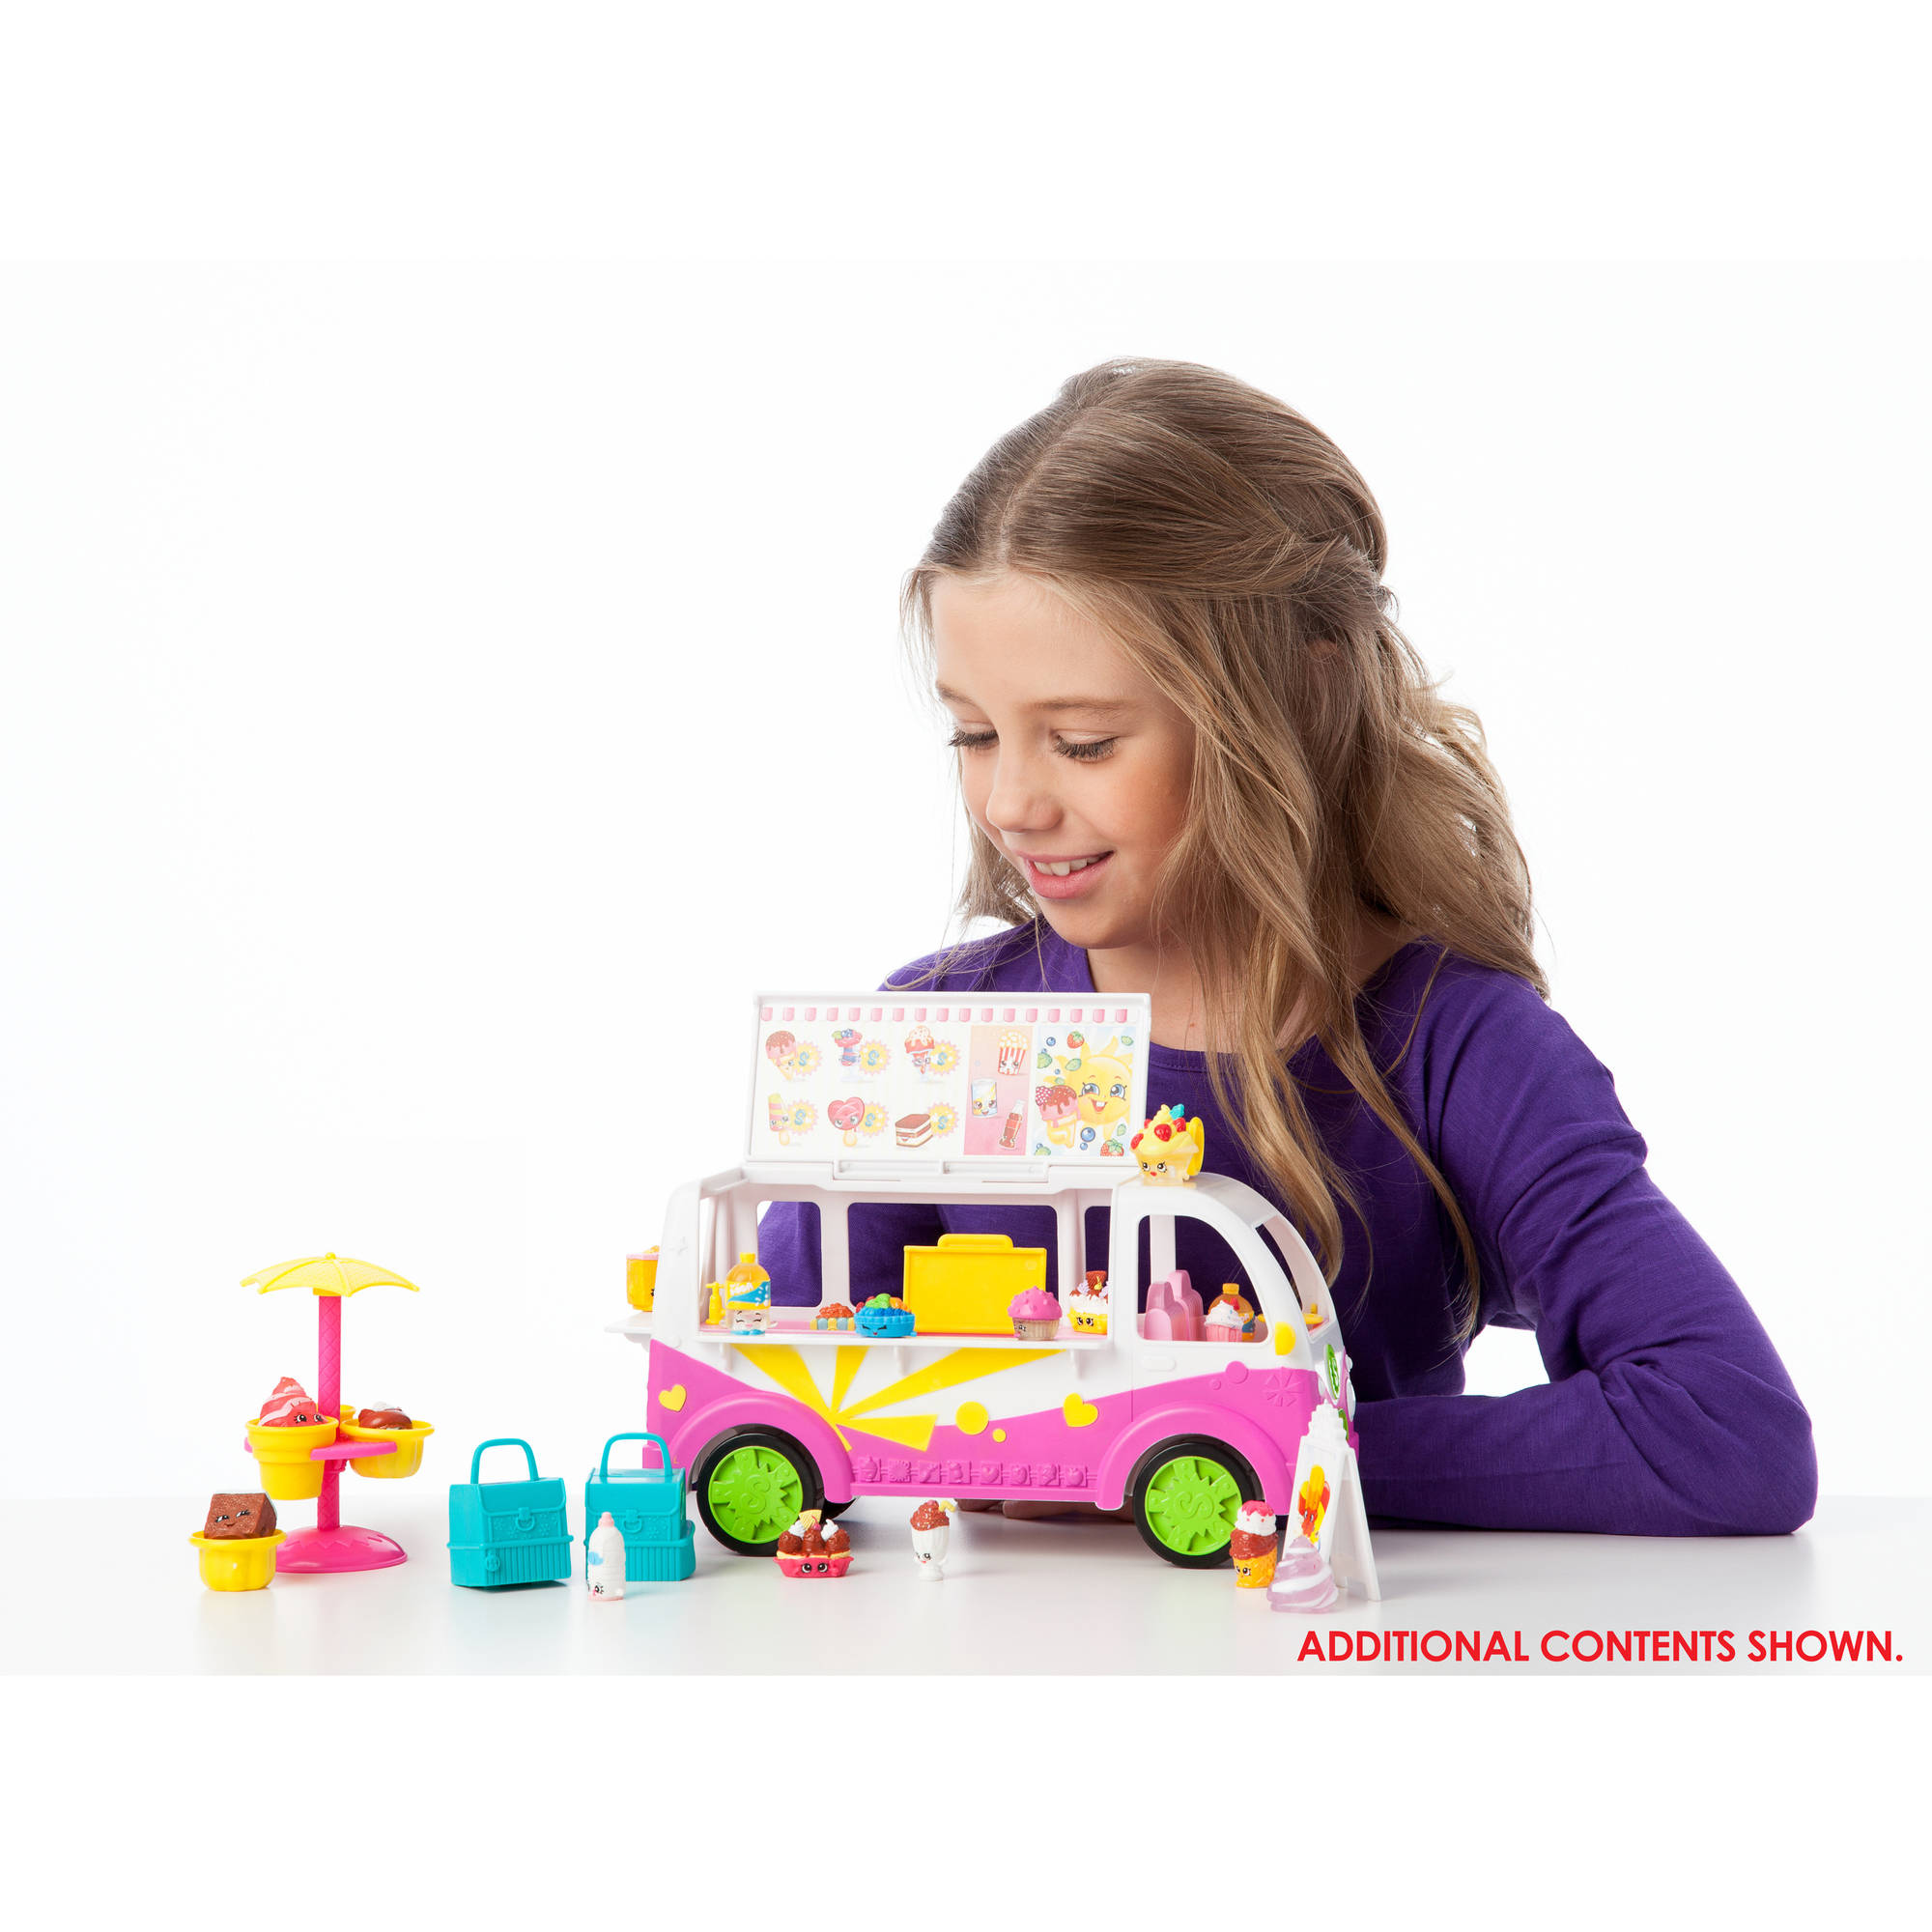 Shopkins Scoops Ice Cream Truck Playset - image 3 of 3